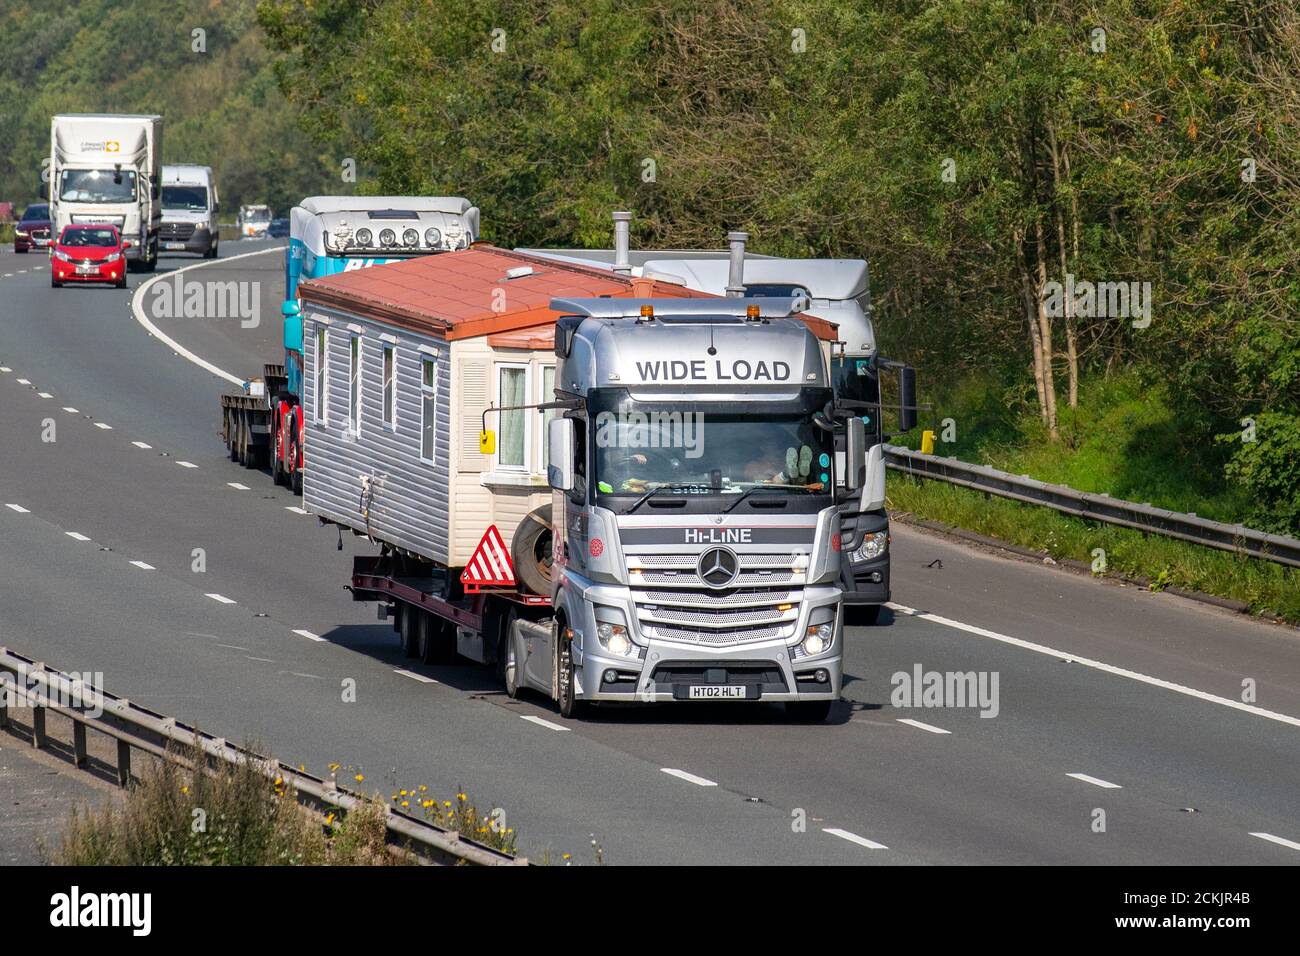 Mobile Home wide load haulage delivery trucks overtaking vehicles, lorry, transportation, Mercedes Benz truck, cargo, Scania R420 vehicle, static caravans delivery, commercial transport, industry, supply chain freight, on the M6 at Lancaster, UK Stock Photo